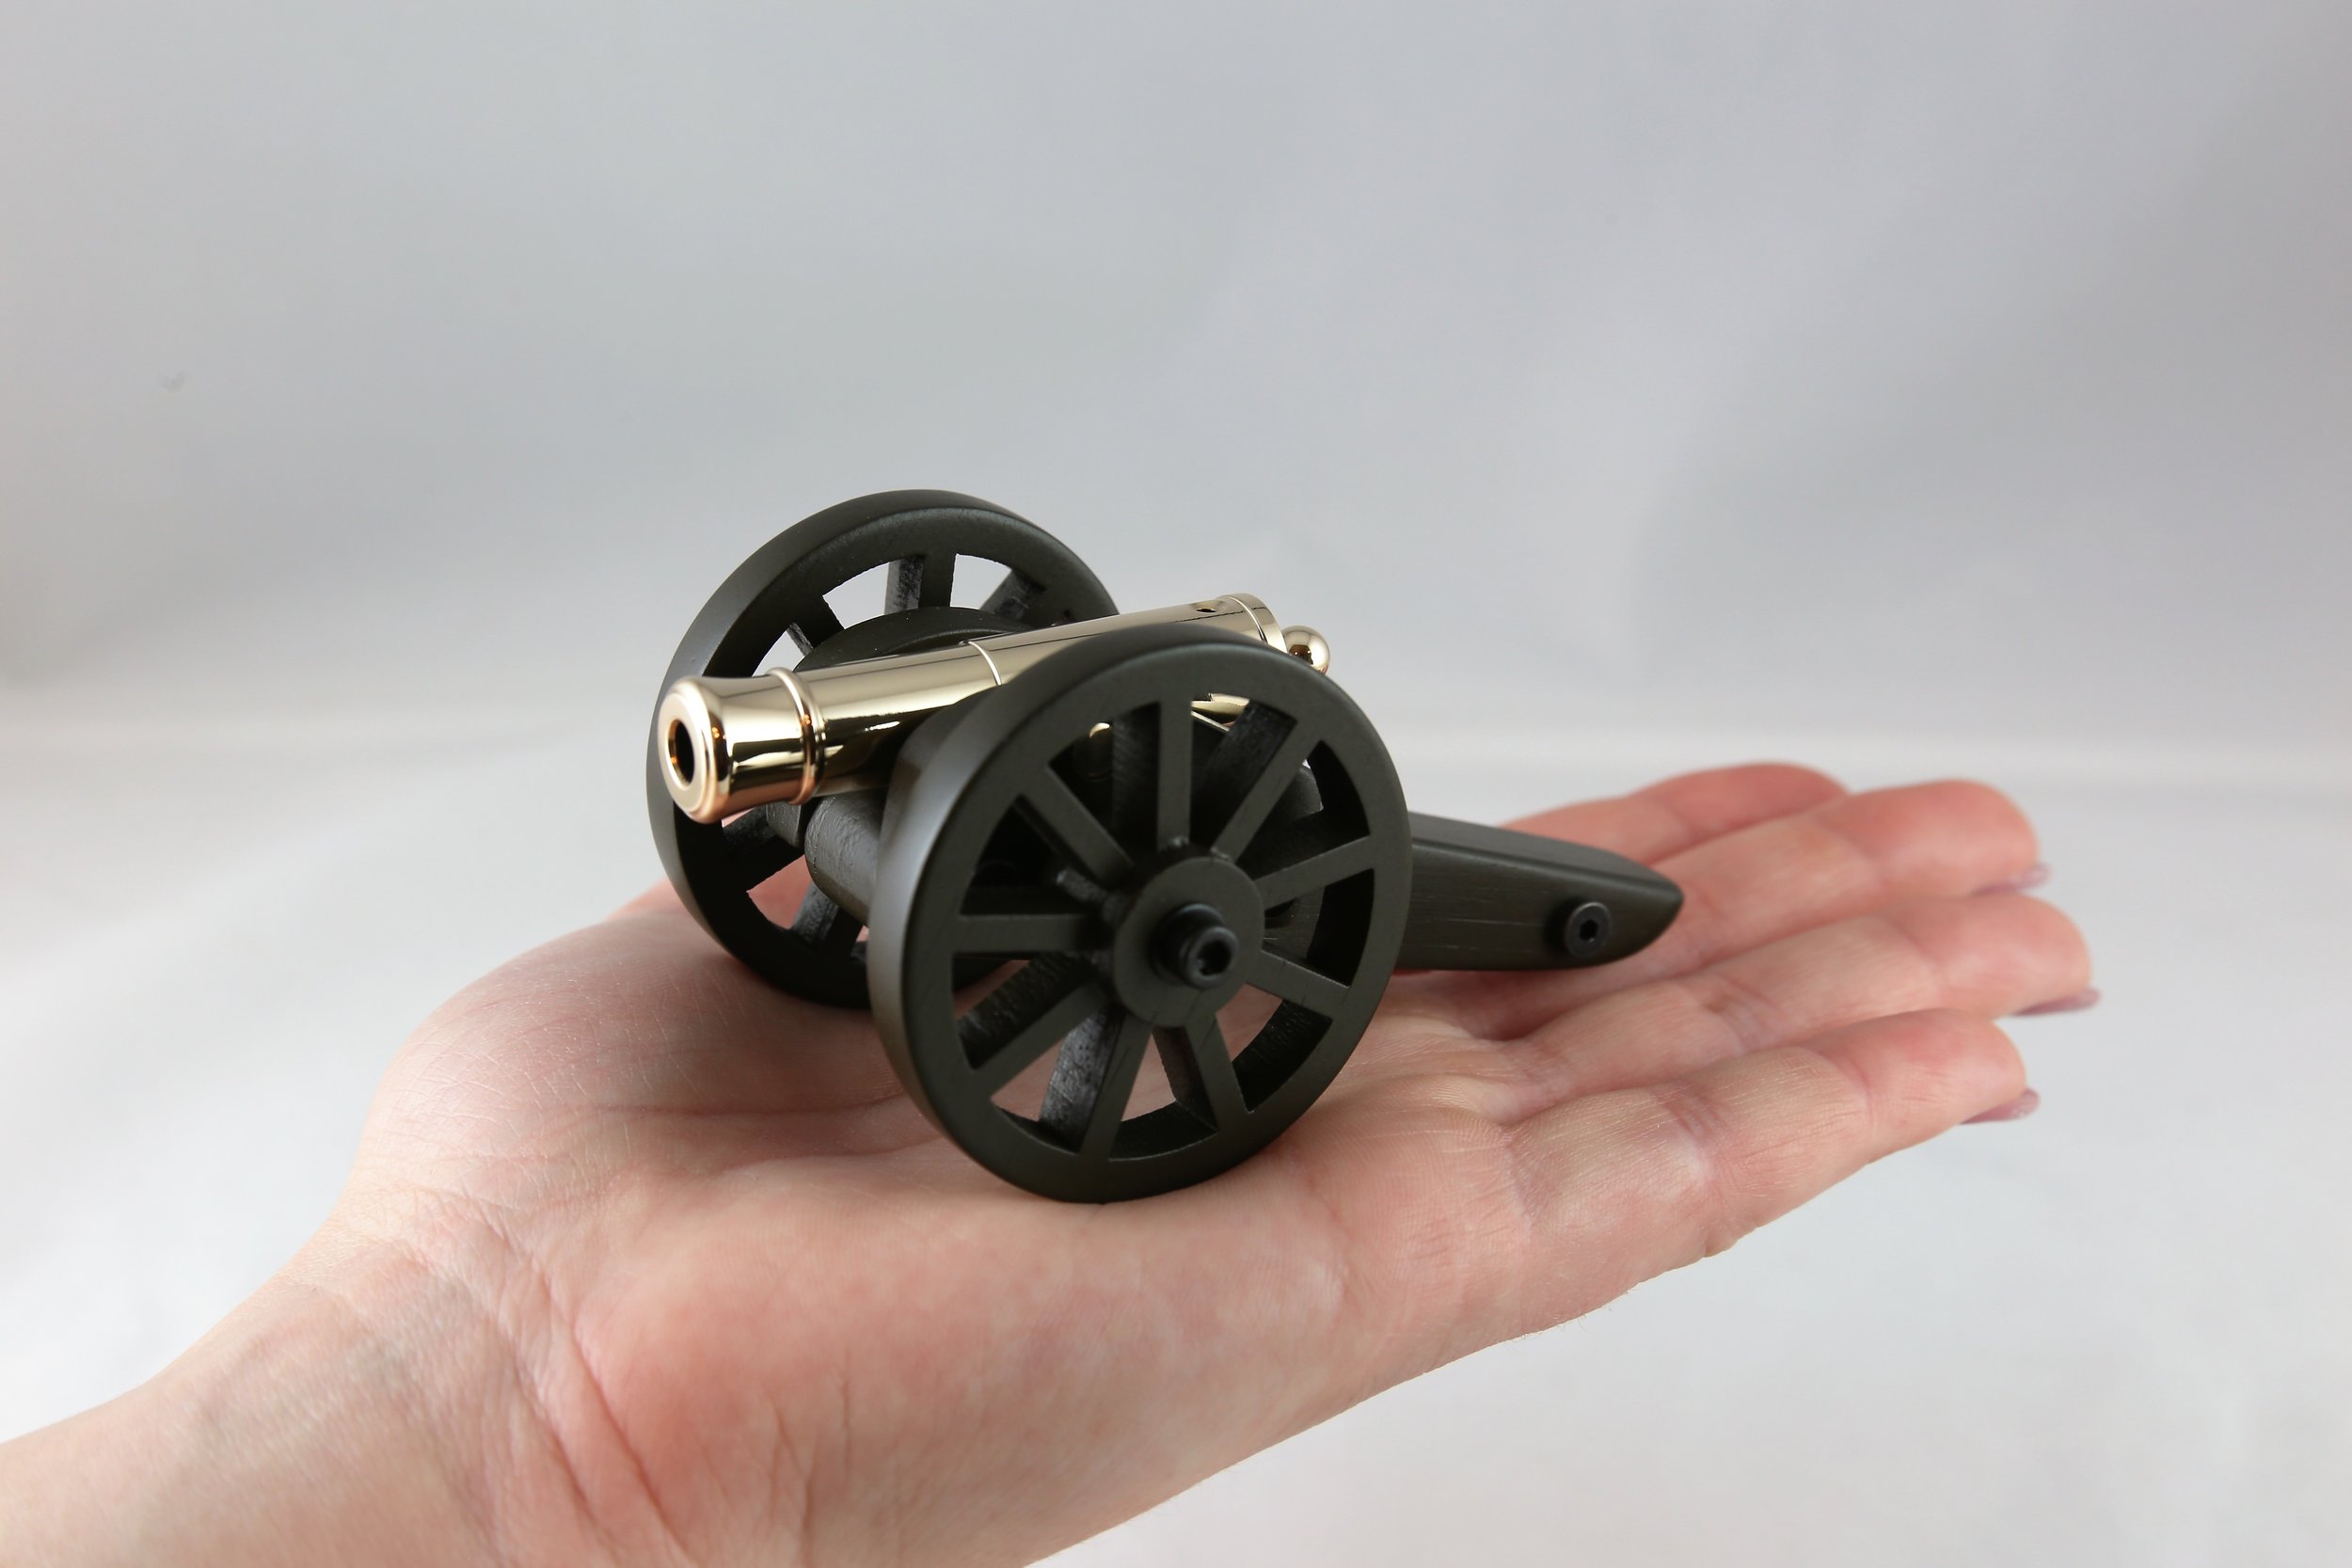 Shoots rounds 3 feet Mini ModelScale Replica Collectible Model Details about   Cannon 